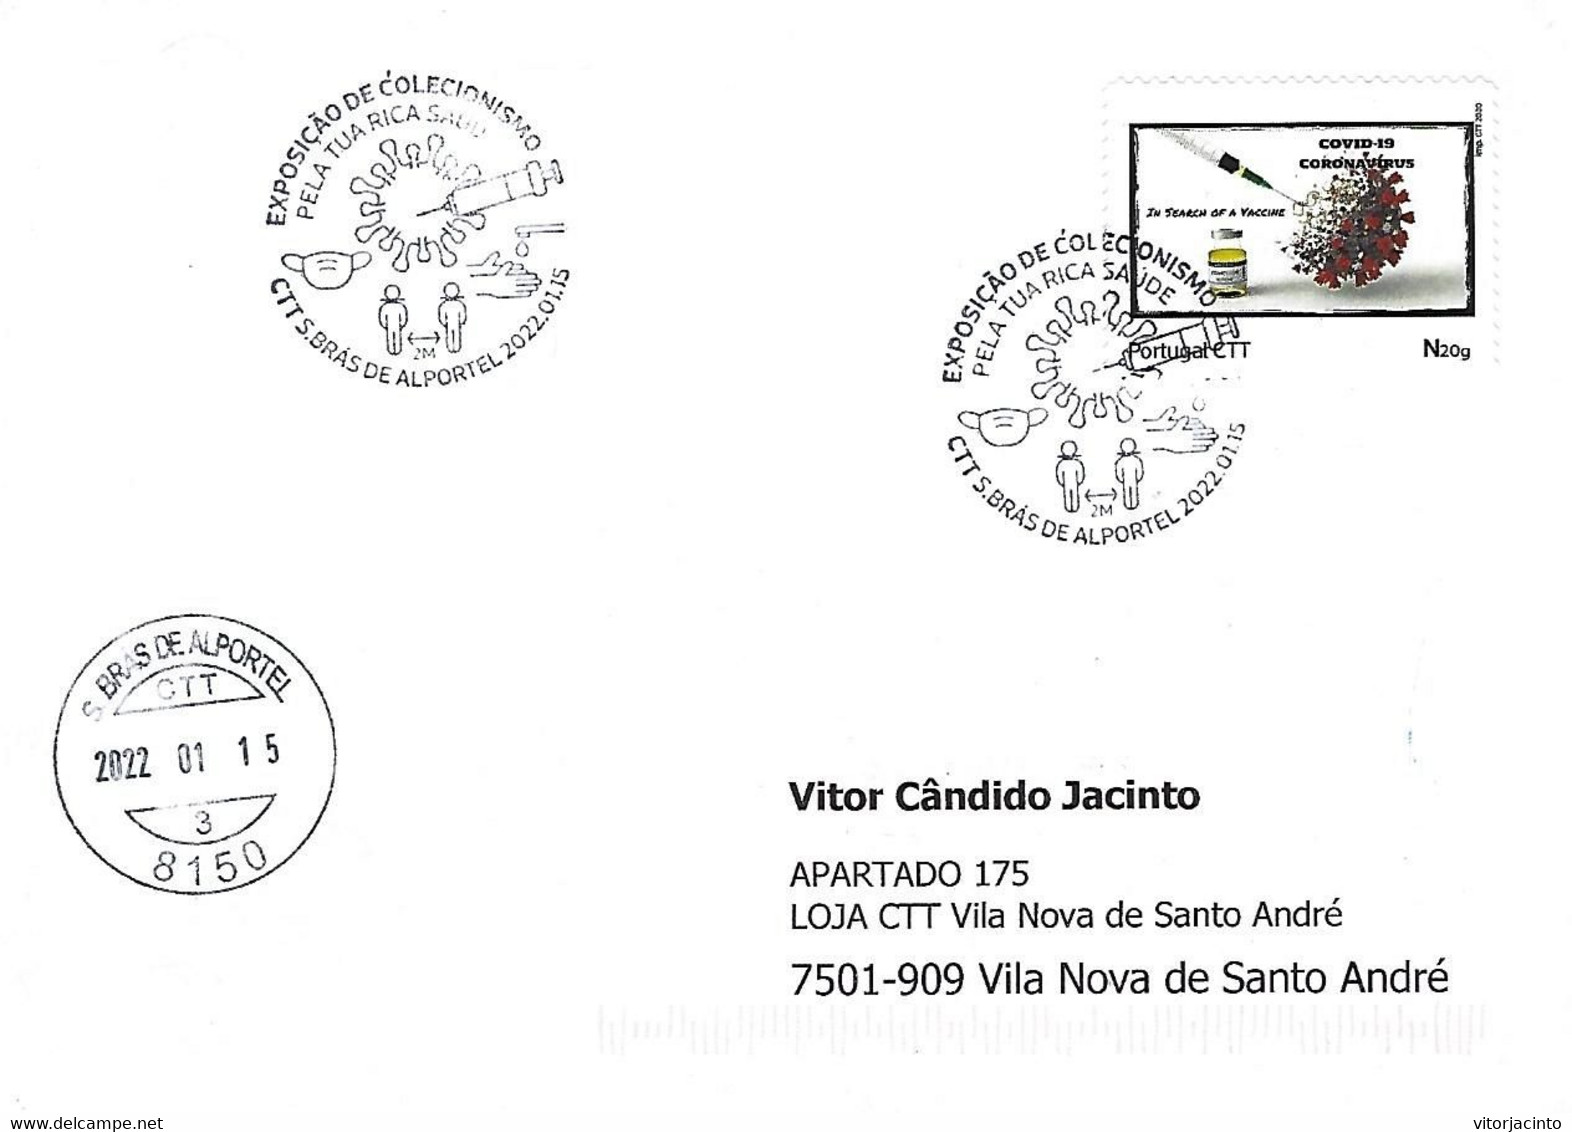 COVID-19 - PORTUGAL - For Your Rich Health - Protect Yourself! - Real Circulated With Personalized Stamps - Drogue